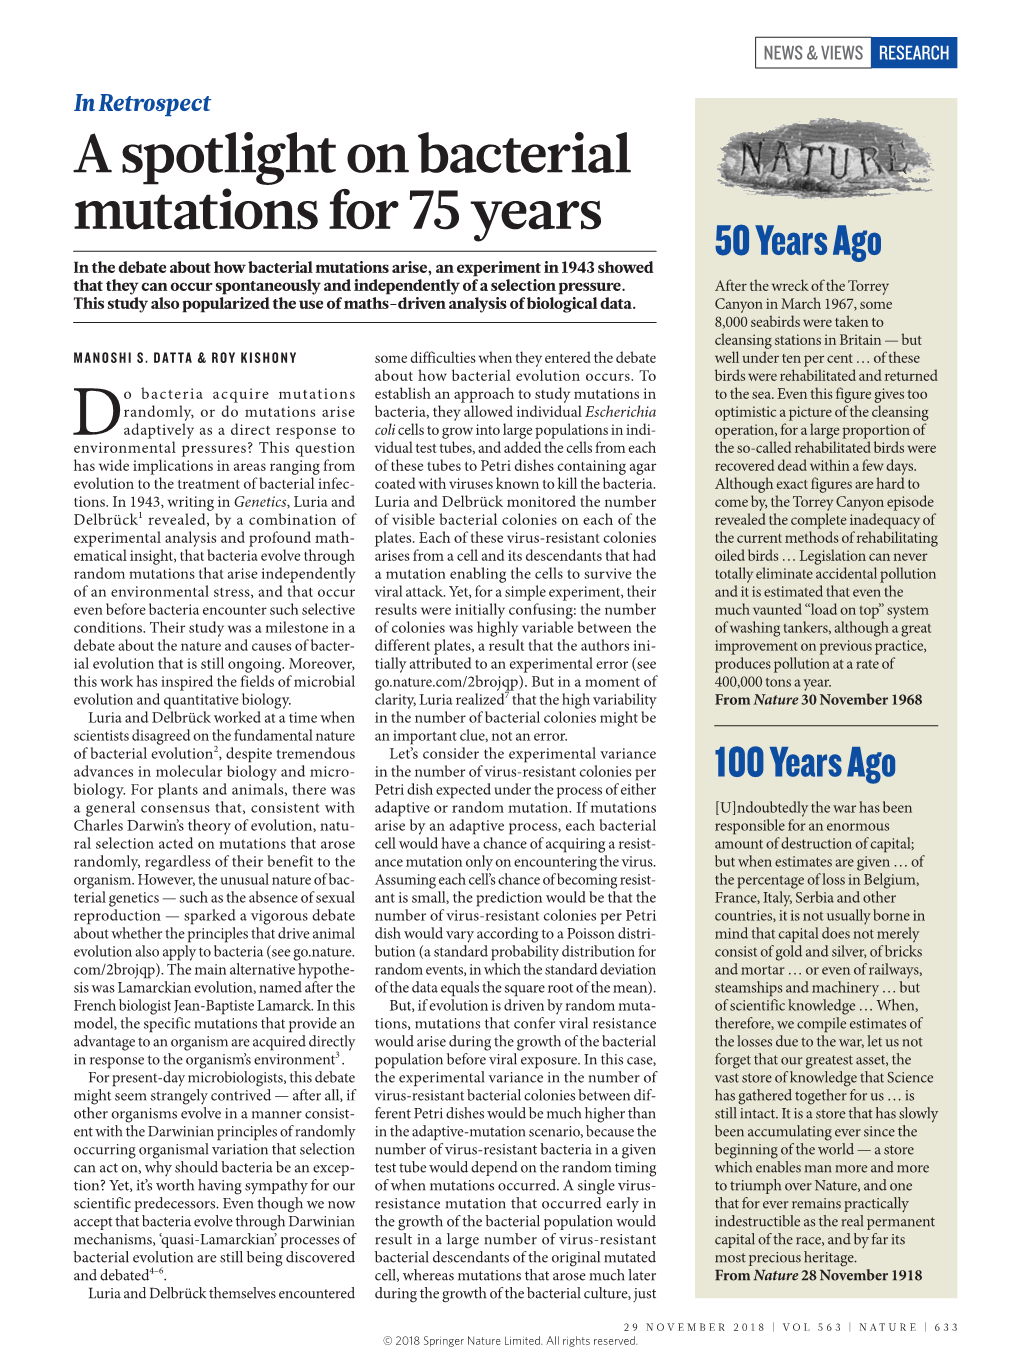 A Spotlight on Bacterial Mutations for 75 Years